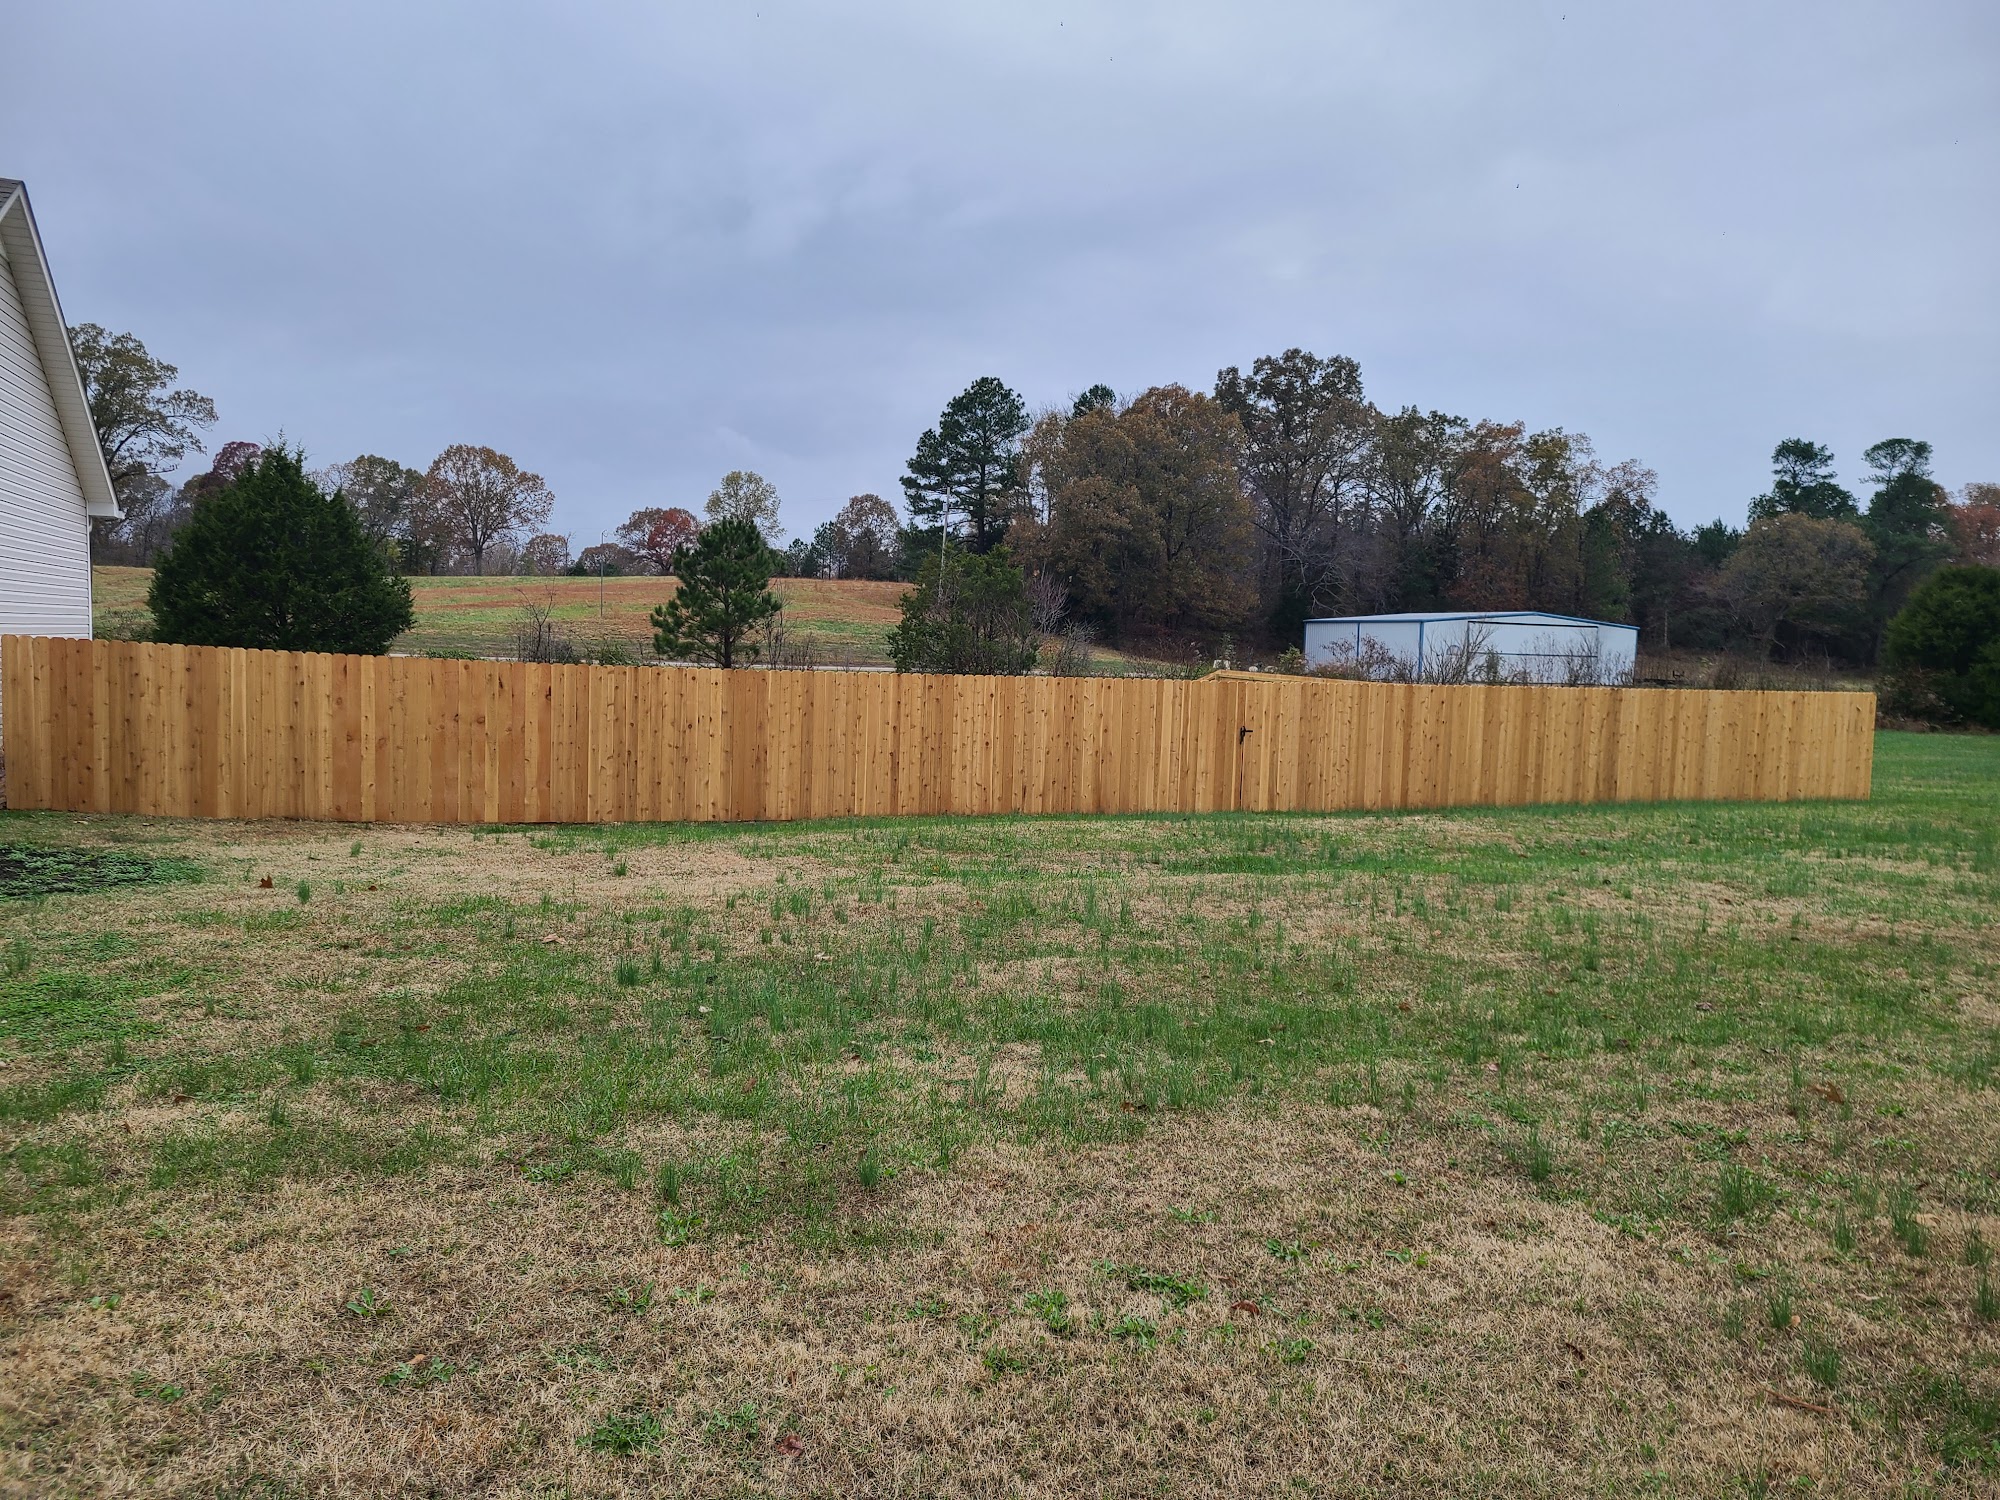 Quality Fence 144 Milan Hwy, Milan Tennessee 38358